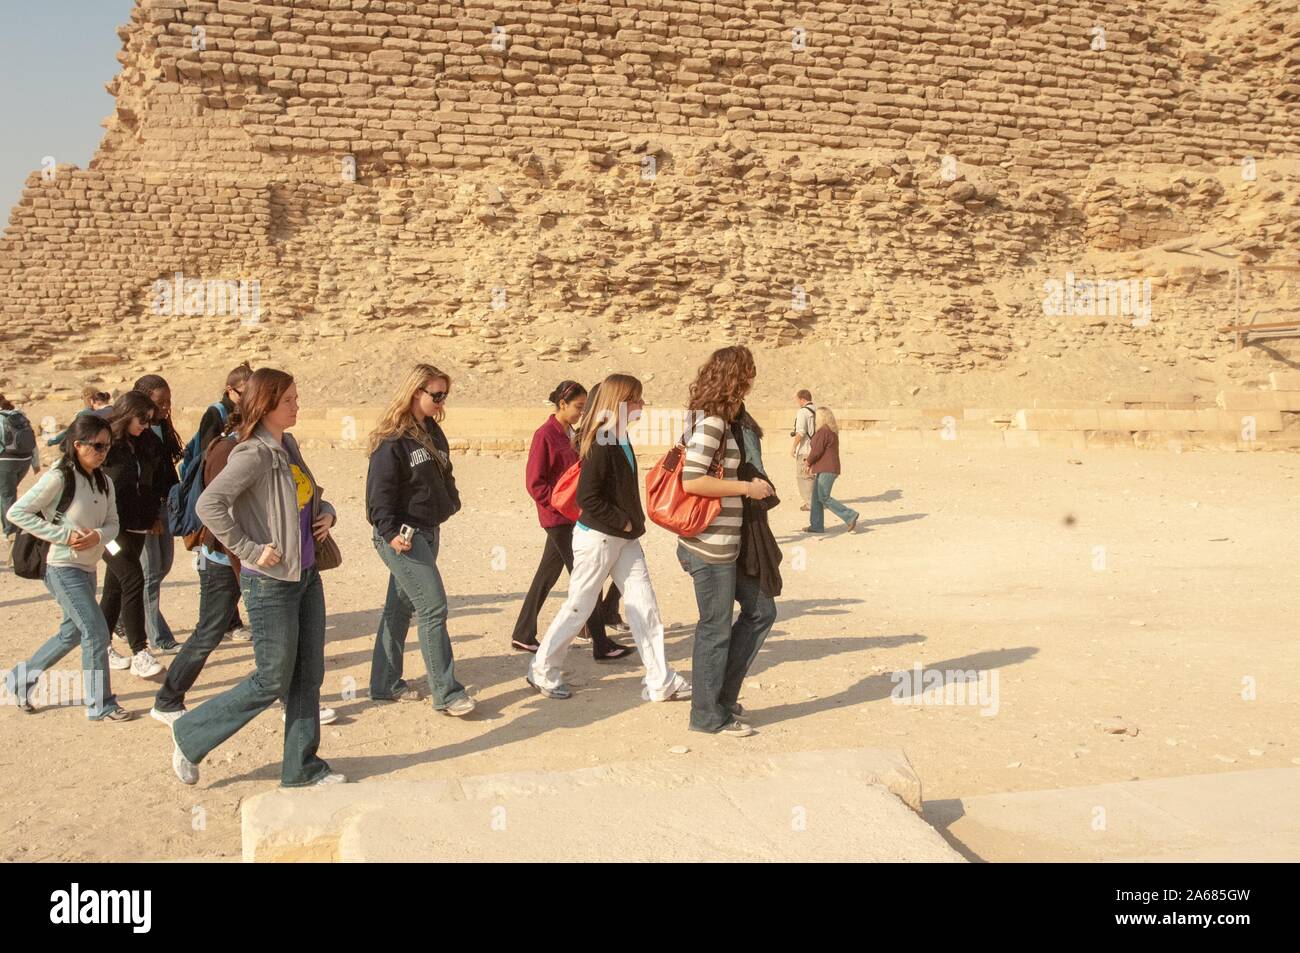 A group of students from the Johns Hopkins University in Baltimore, Maryland, outside on a sunny day, walking near the crumbling base of a pyramid, Giza, Egypt during a study abroad program, January 6, 2008. From the Homewood Photography Collection. () Stock Photo